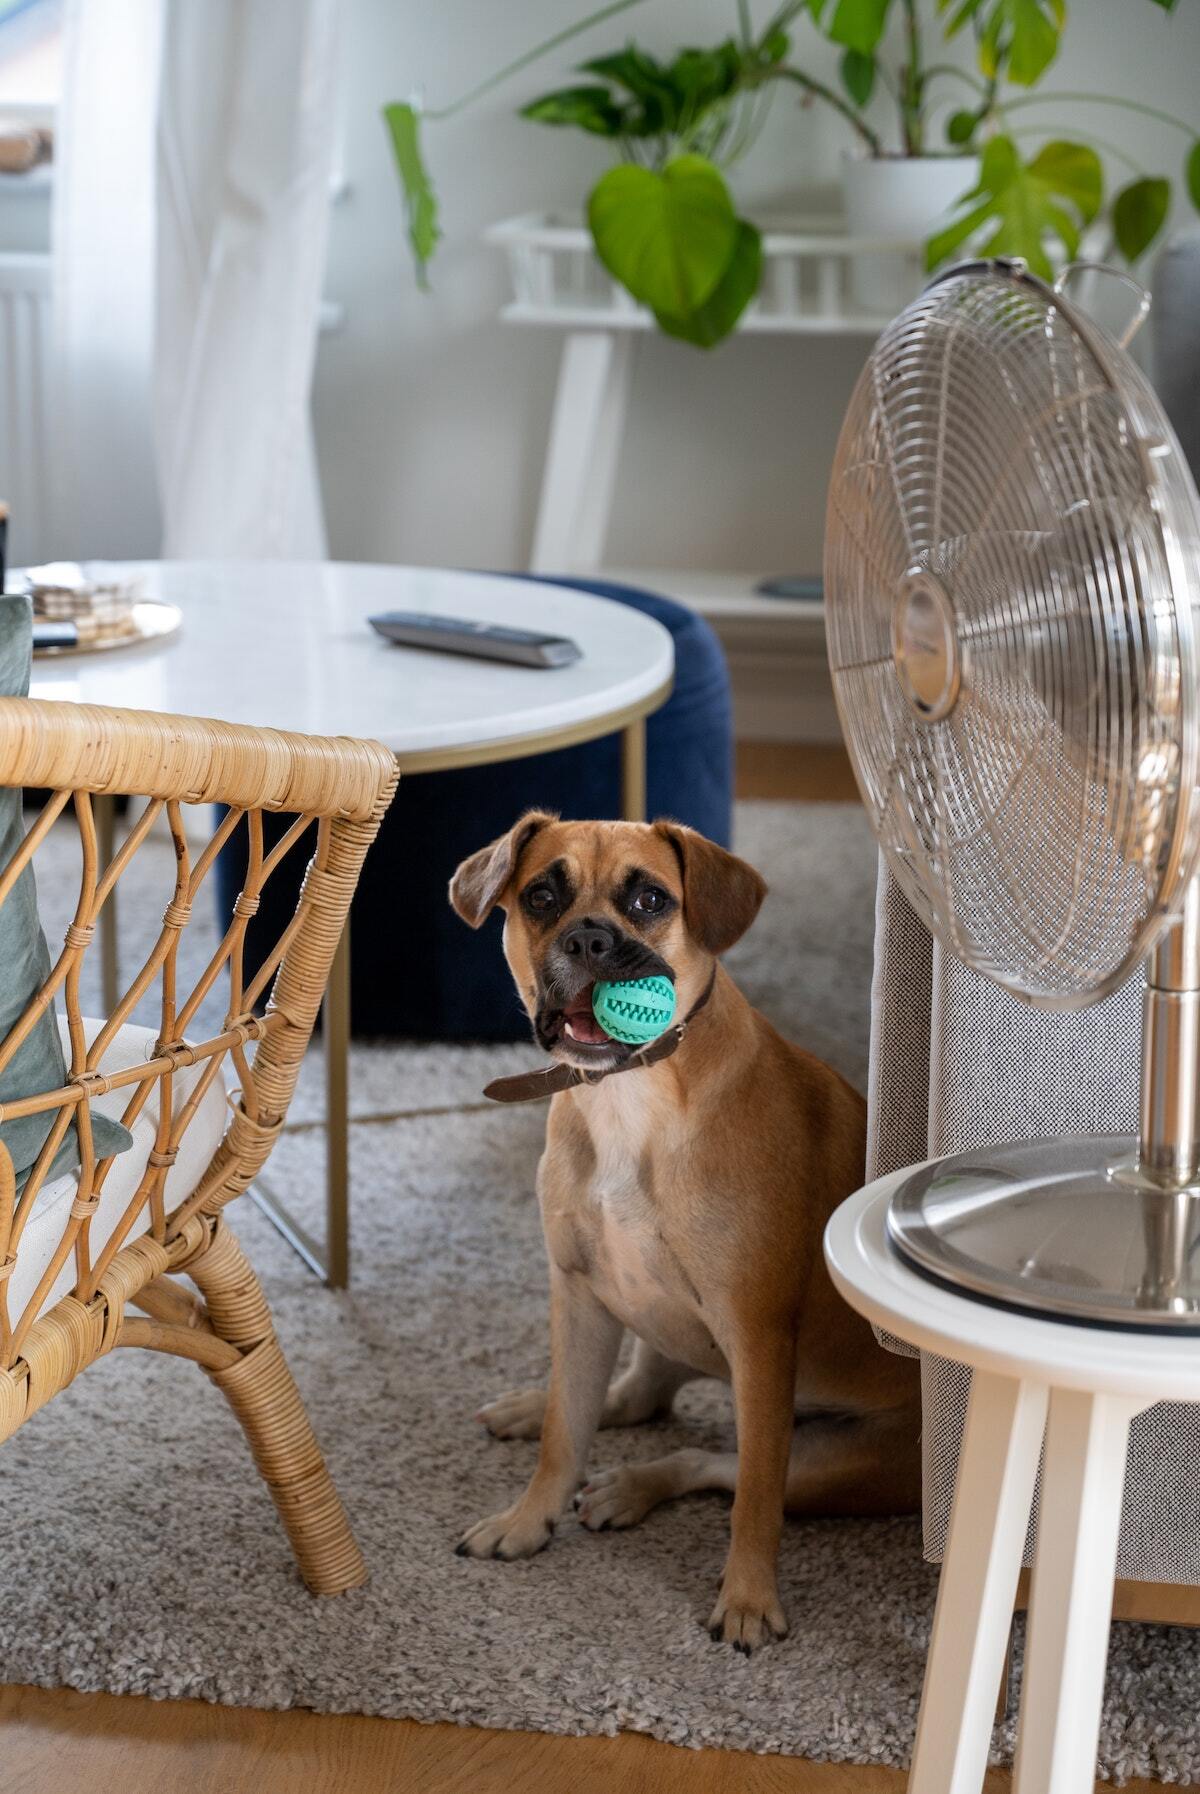 Take care of your pets and your HVAC system with Controlled Heating & Cooling